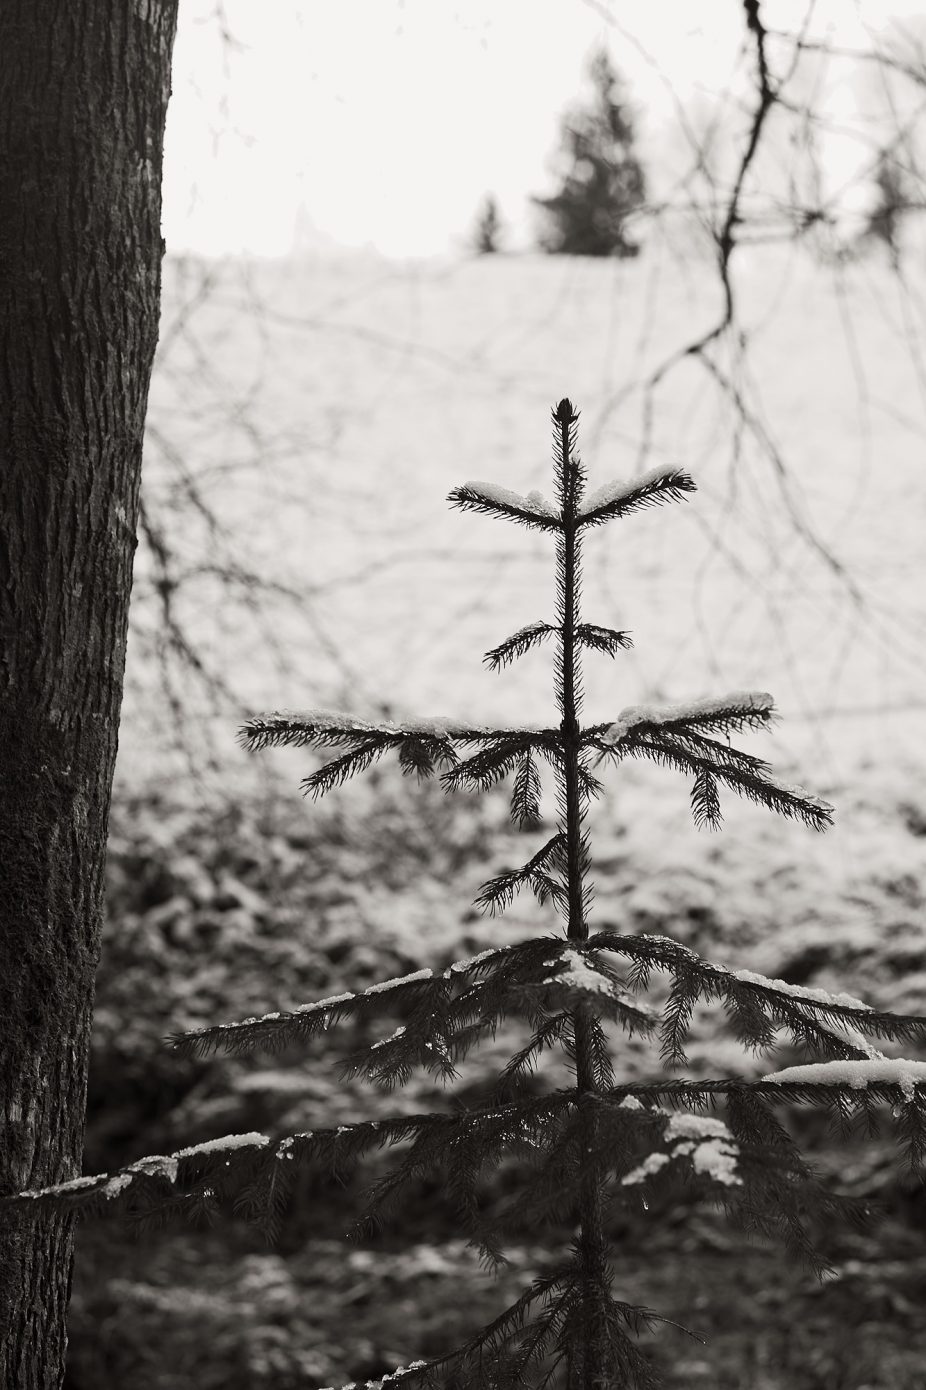 When I am grown up, I will be a Christmas Tree. Tagged with Black & White, Minor Landscape, Treatment